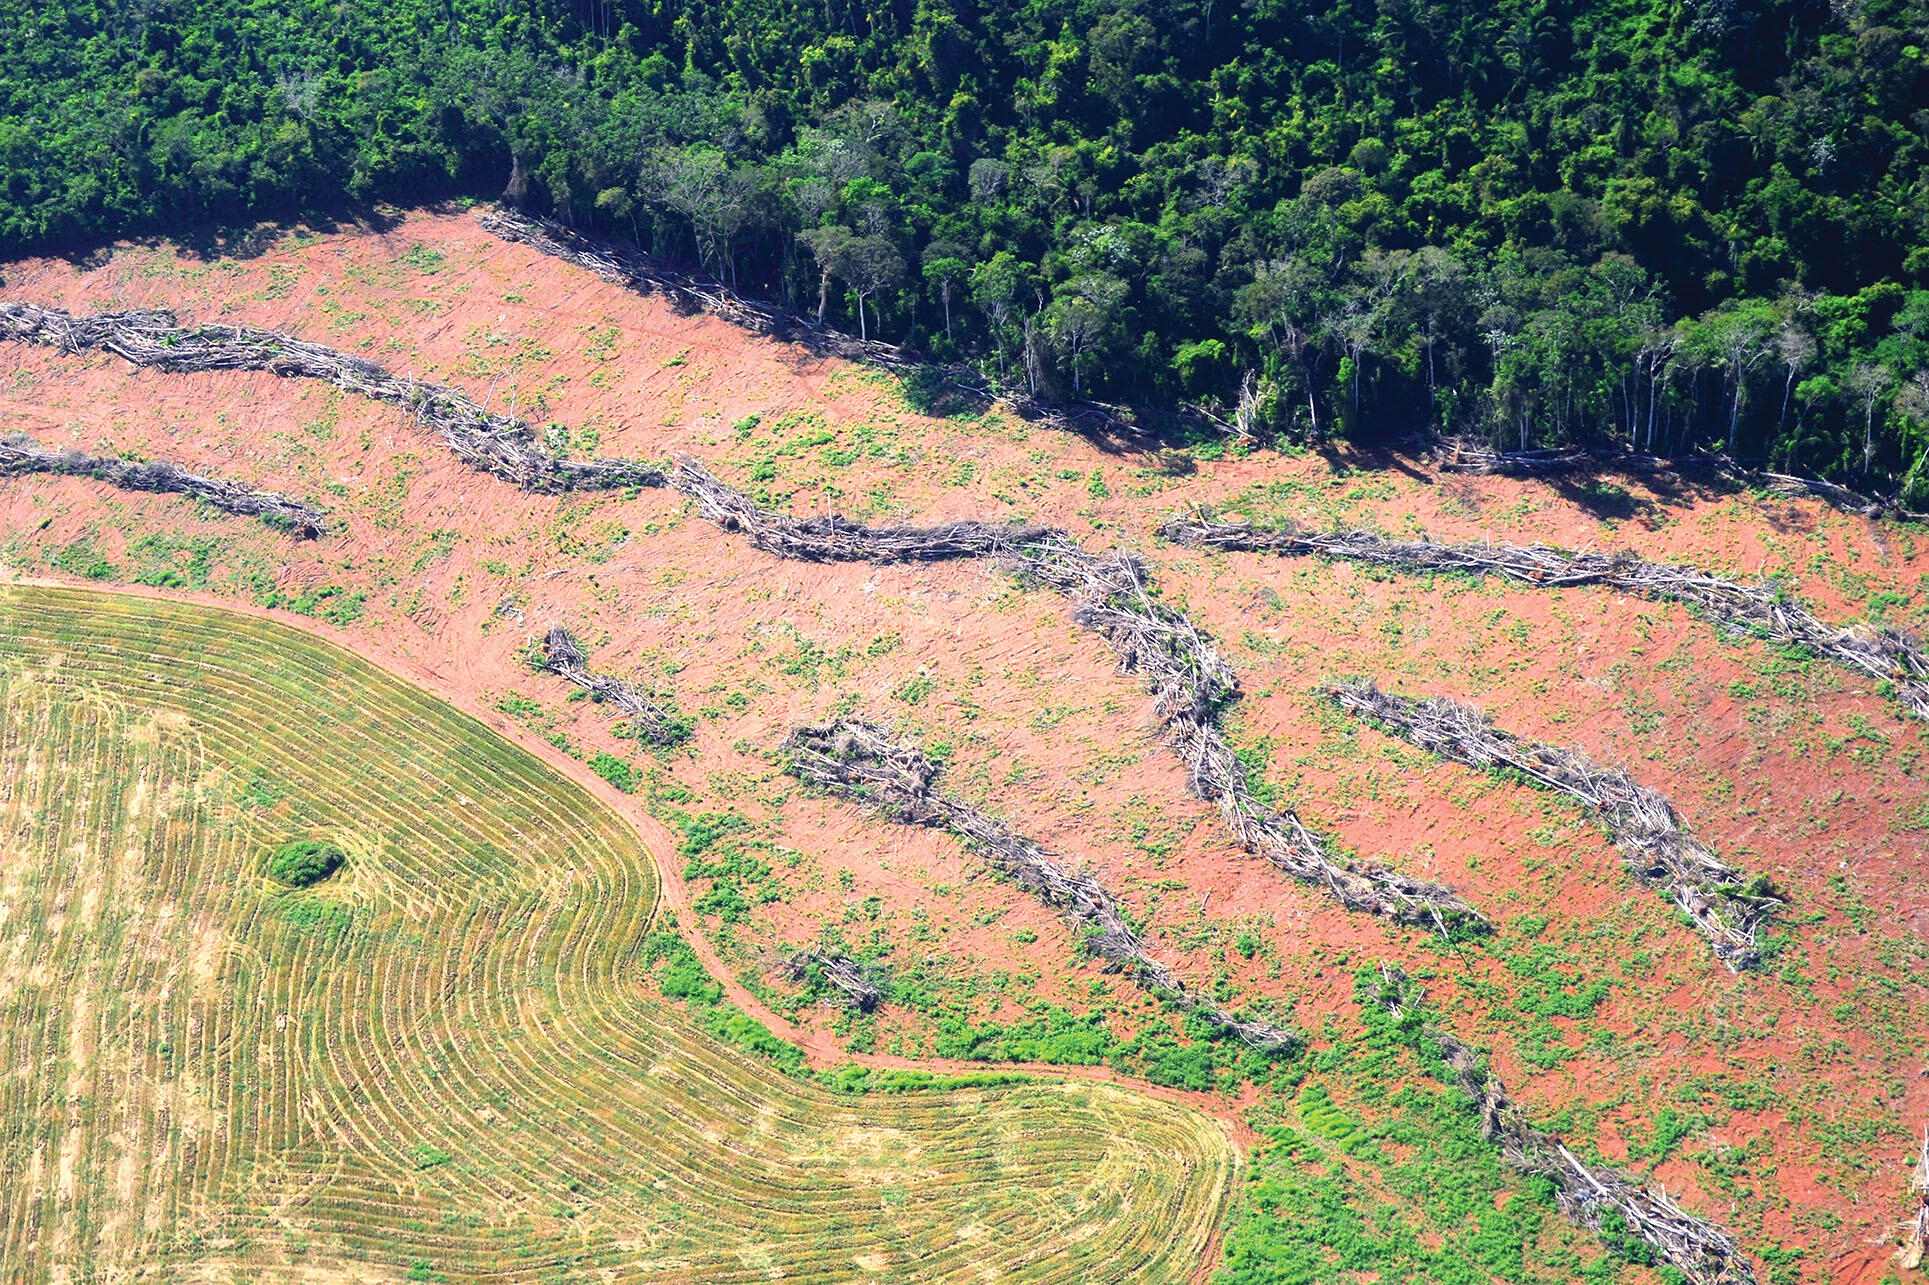 President Bolsonaro says that protected areas in the Amazon hold up development. Above, deforestation in Novo Progresso, Pará, in 2014. (Photo by Vinícius Mendonça - Ascom/Ibama.)